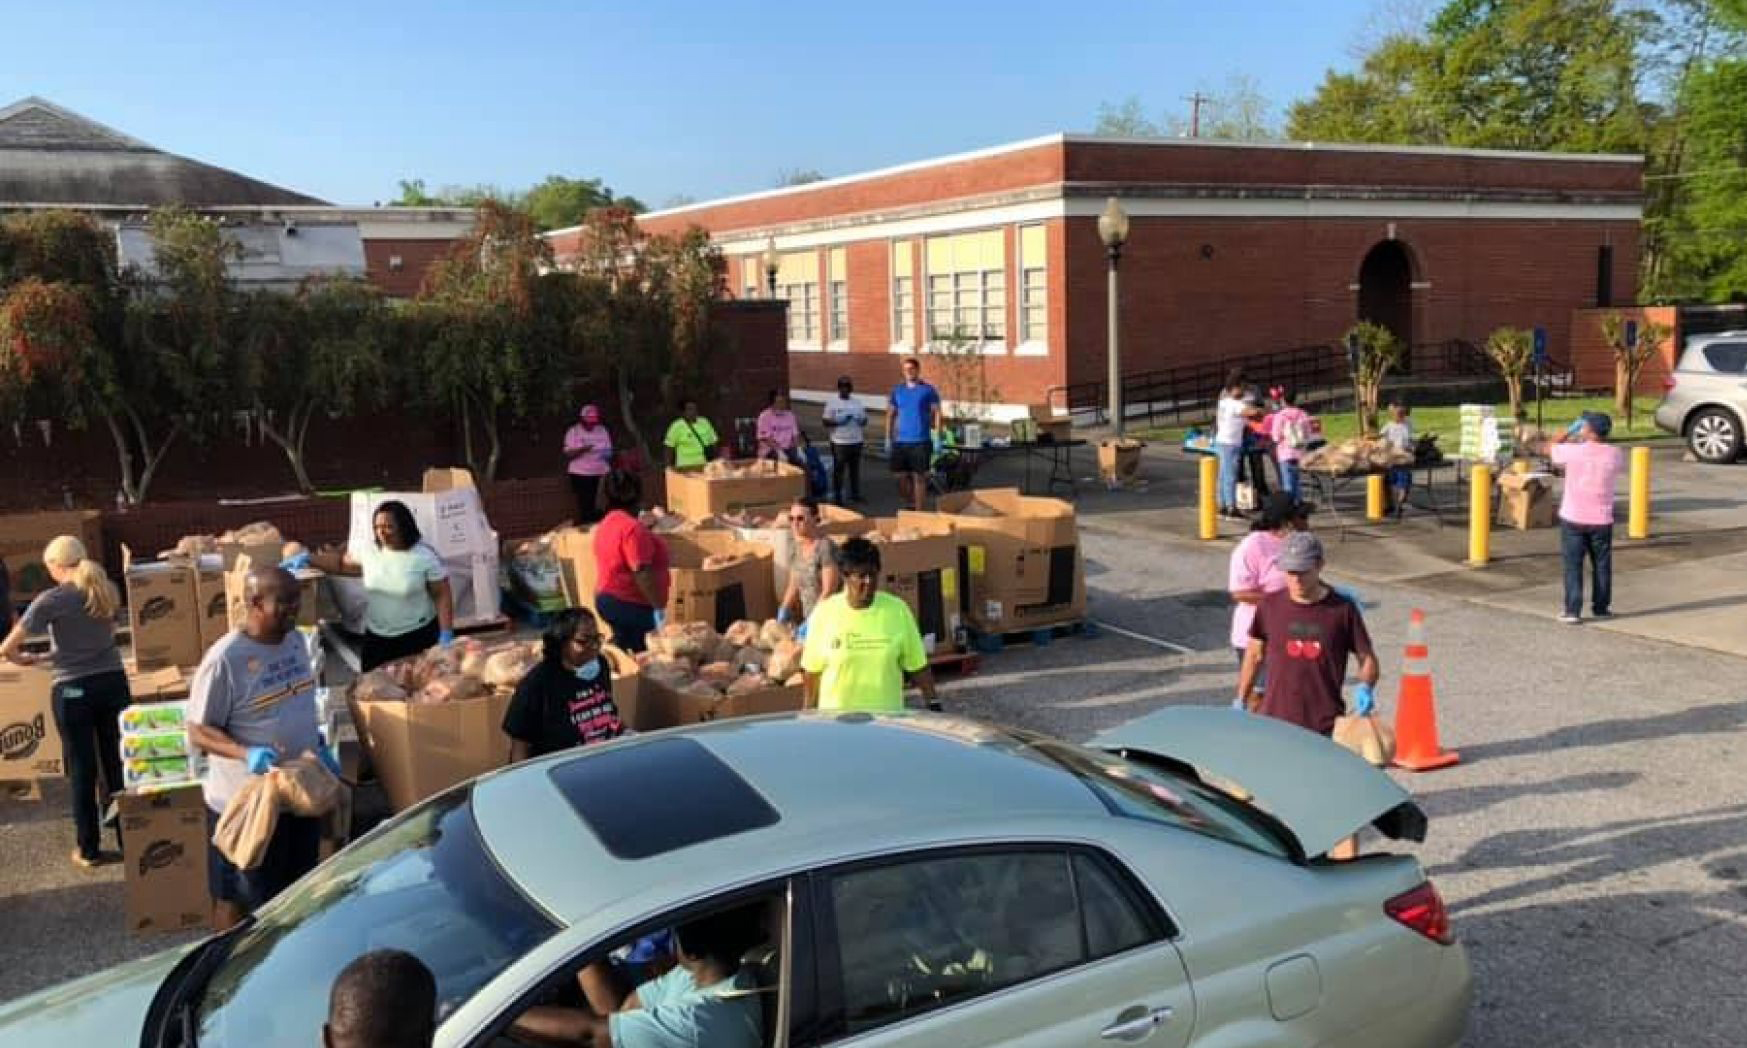 Veterans group continues to run mobile food pantry in face of COVID-19